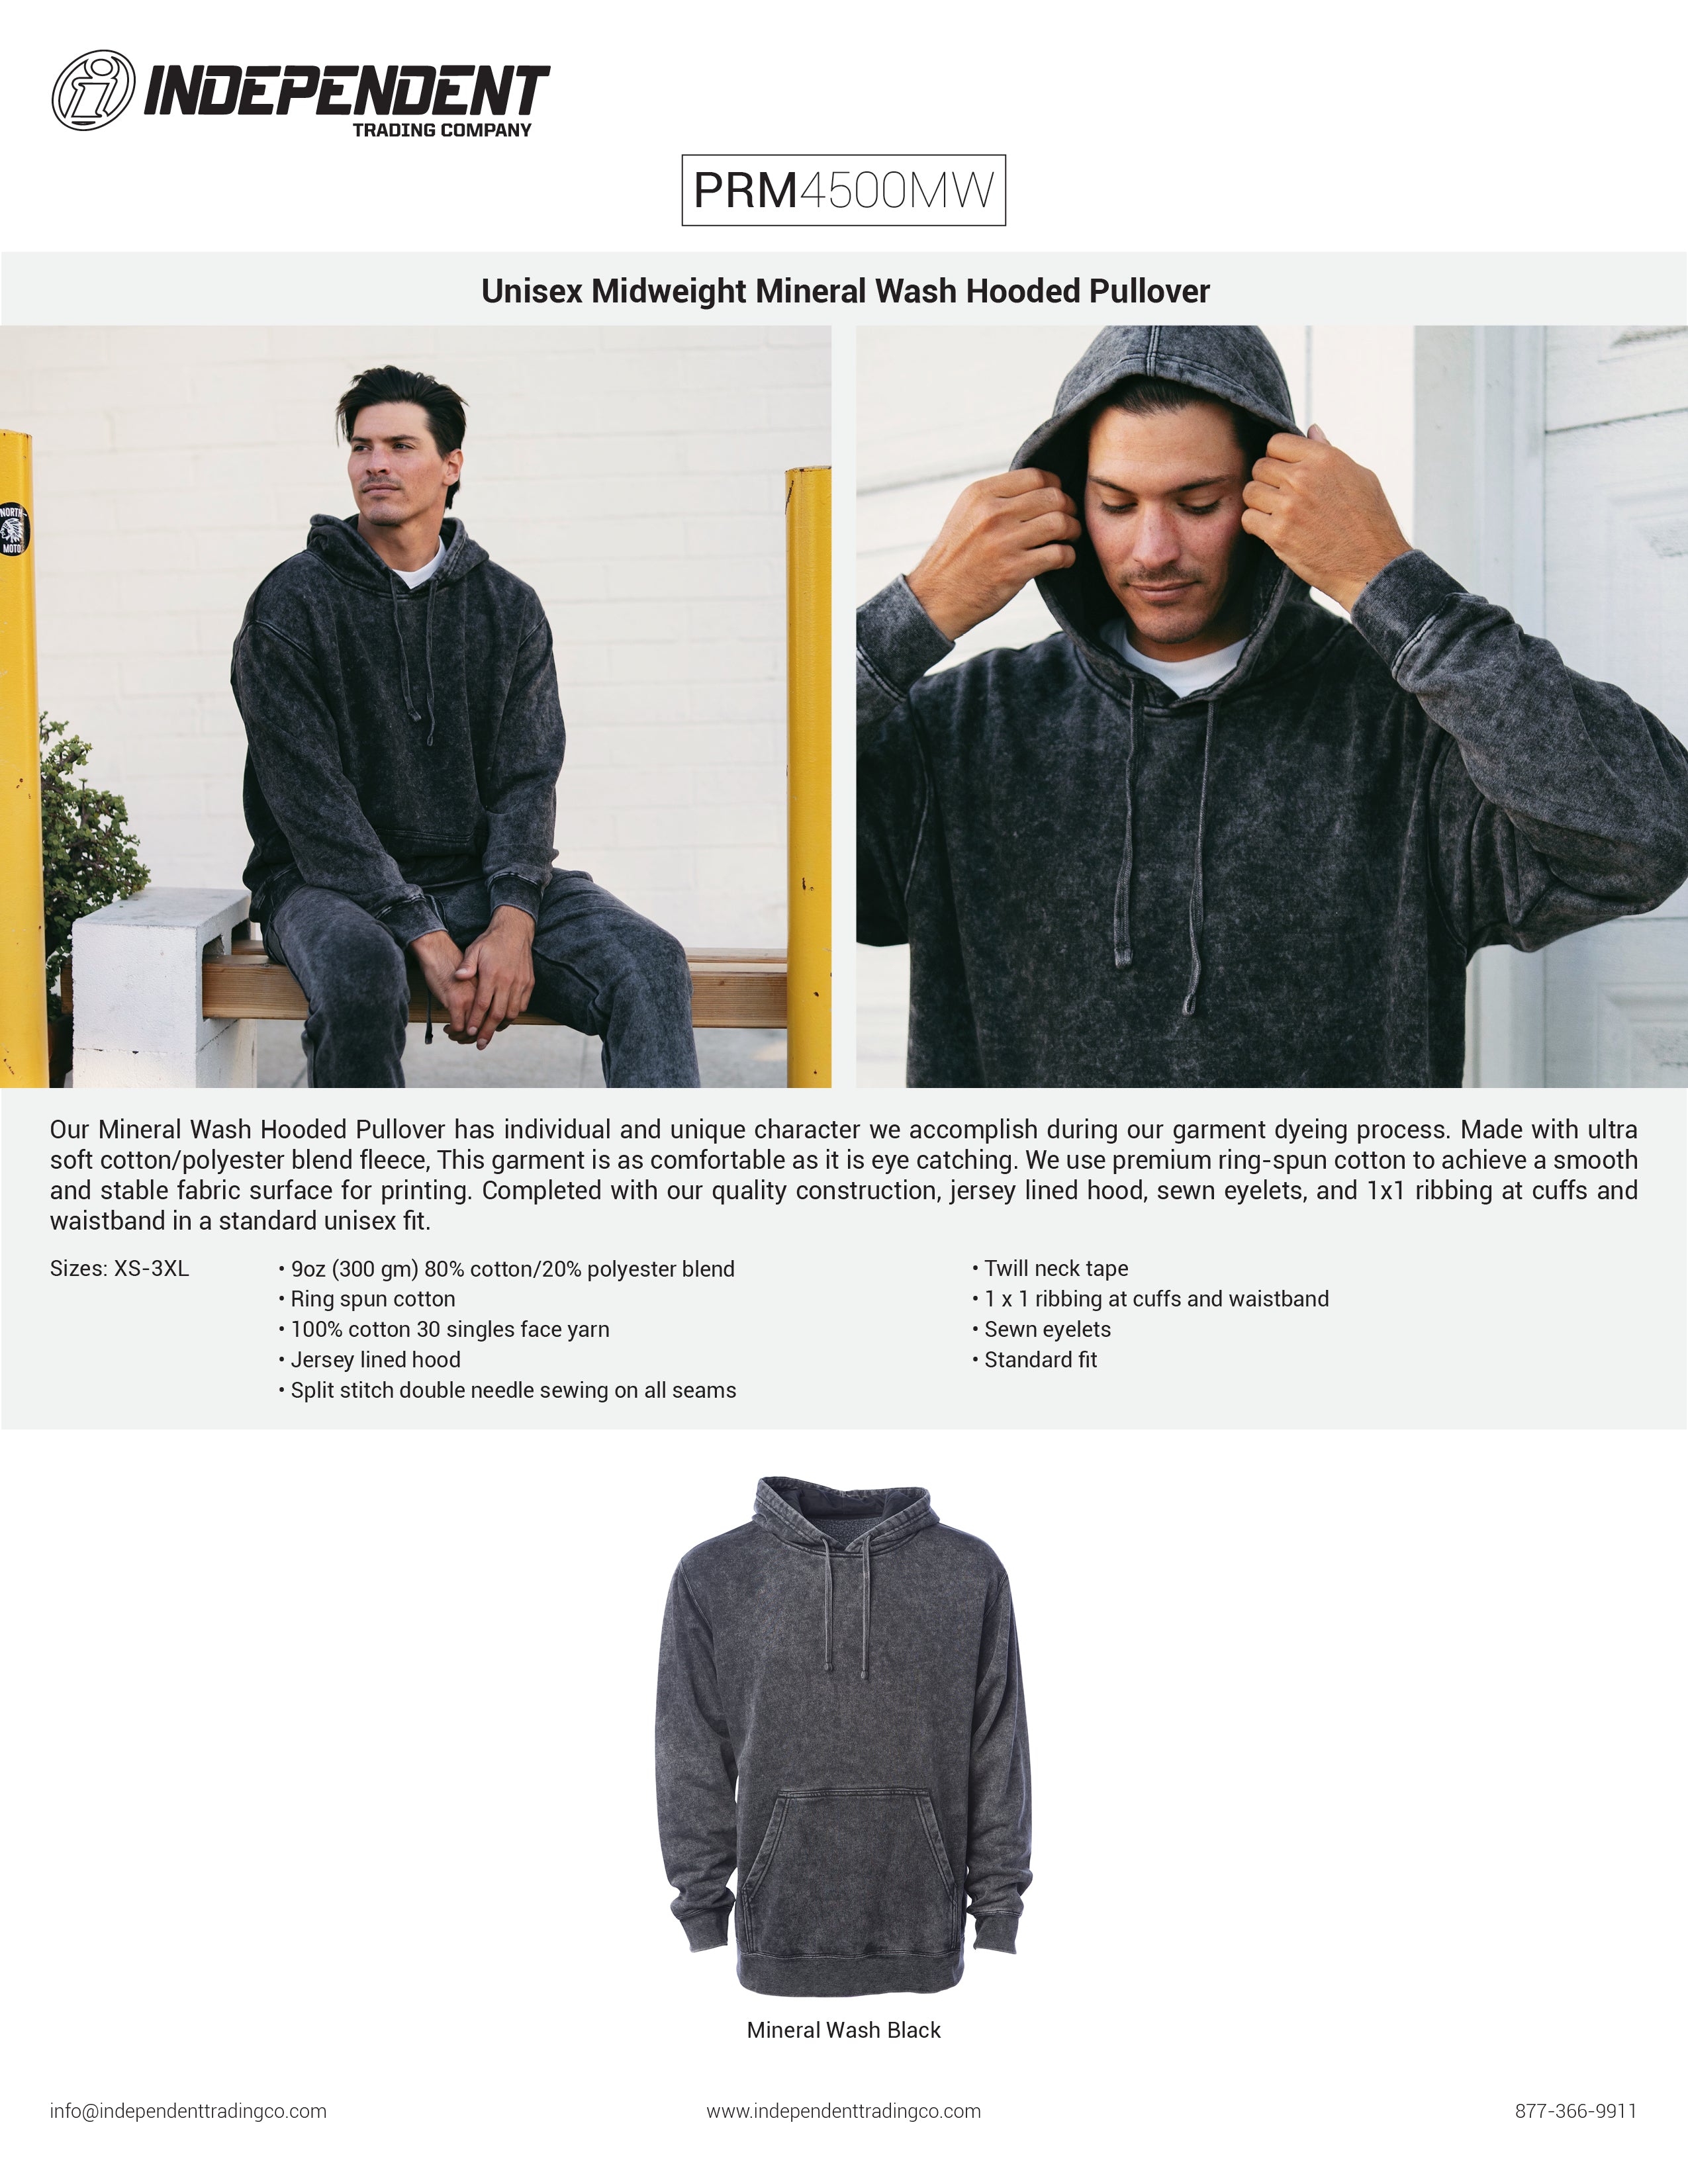 PRM4500MW Unisex Mineral Wash Hooded Pullover